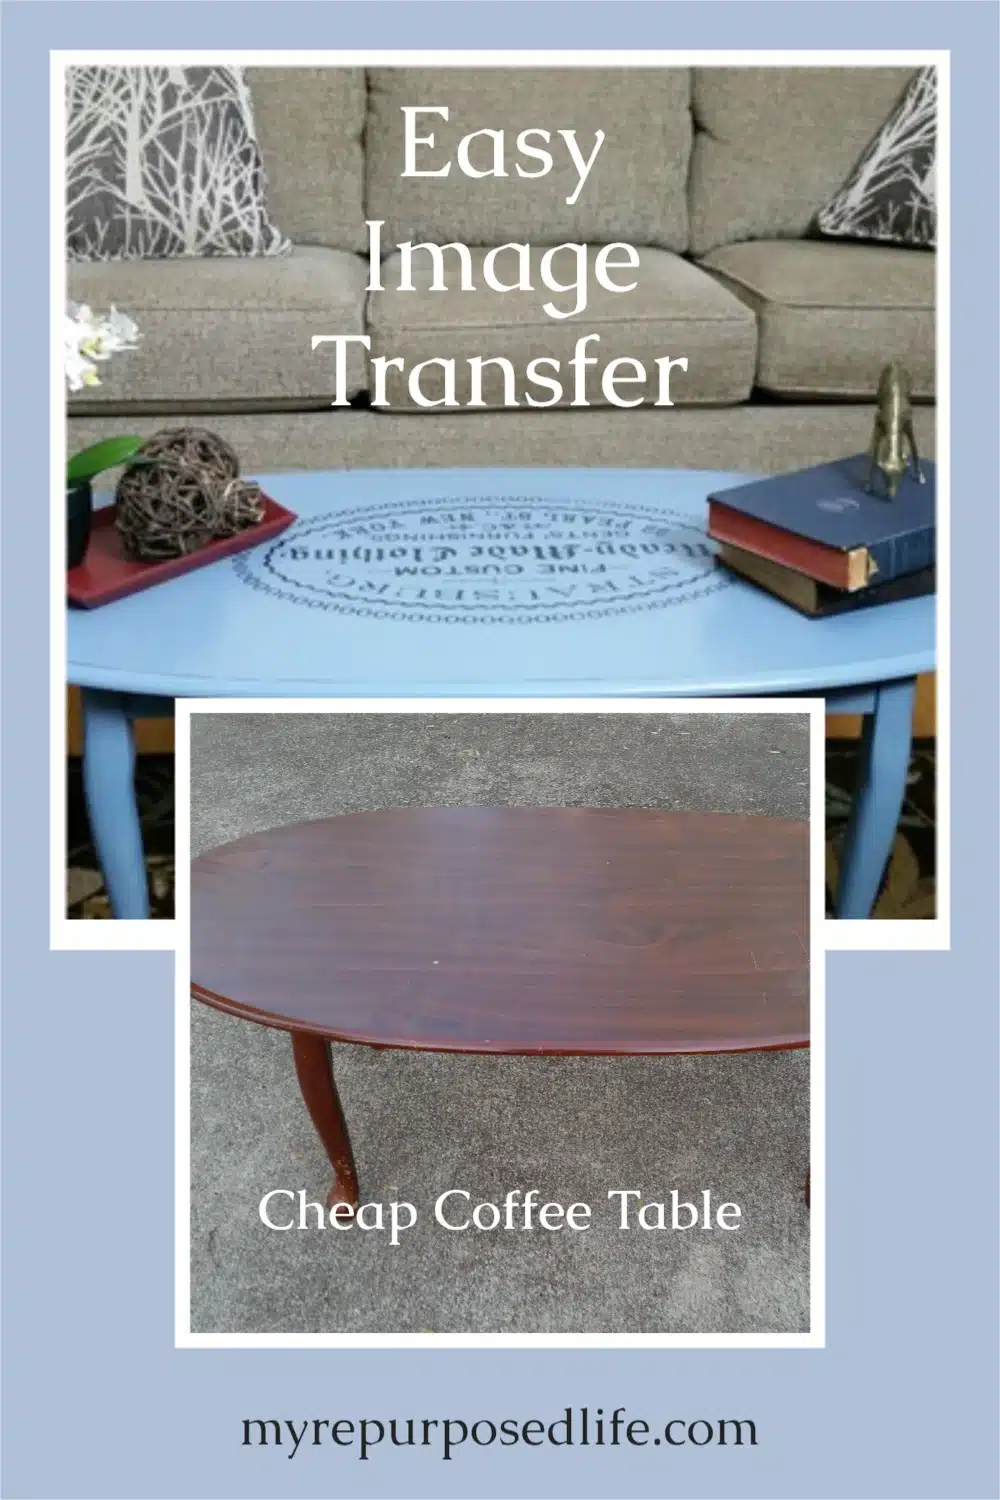 I did an easy image transfer on an old coffee table using 1Gel from Heirloom Traditions Paint. Transferring images is a fun way to update old furniture. via @repurposedlife